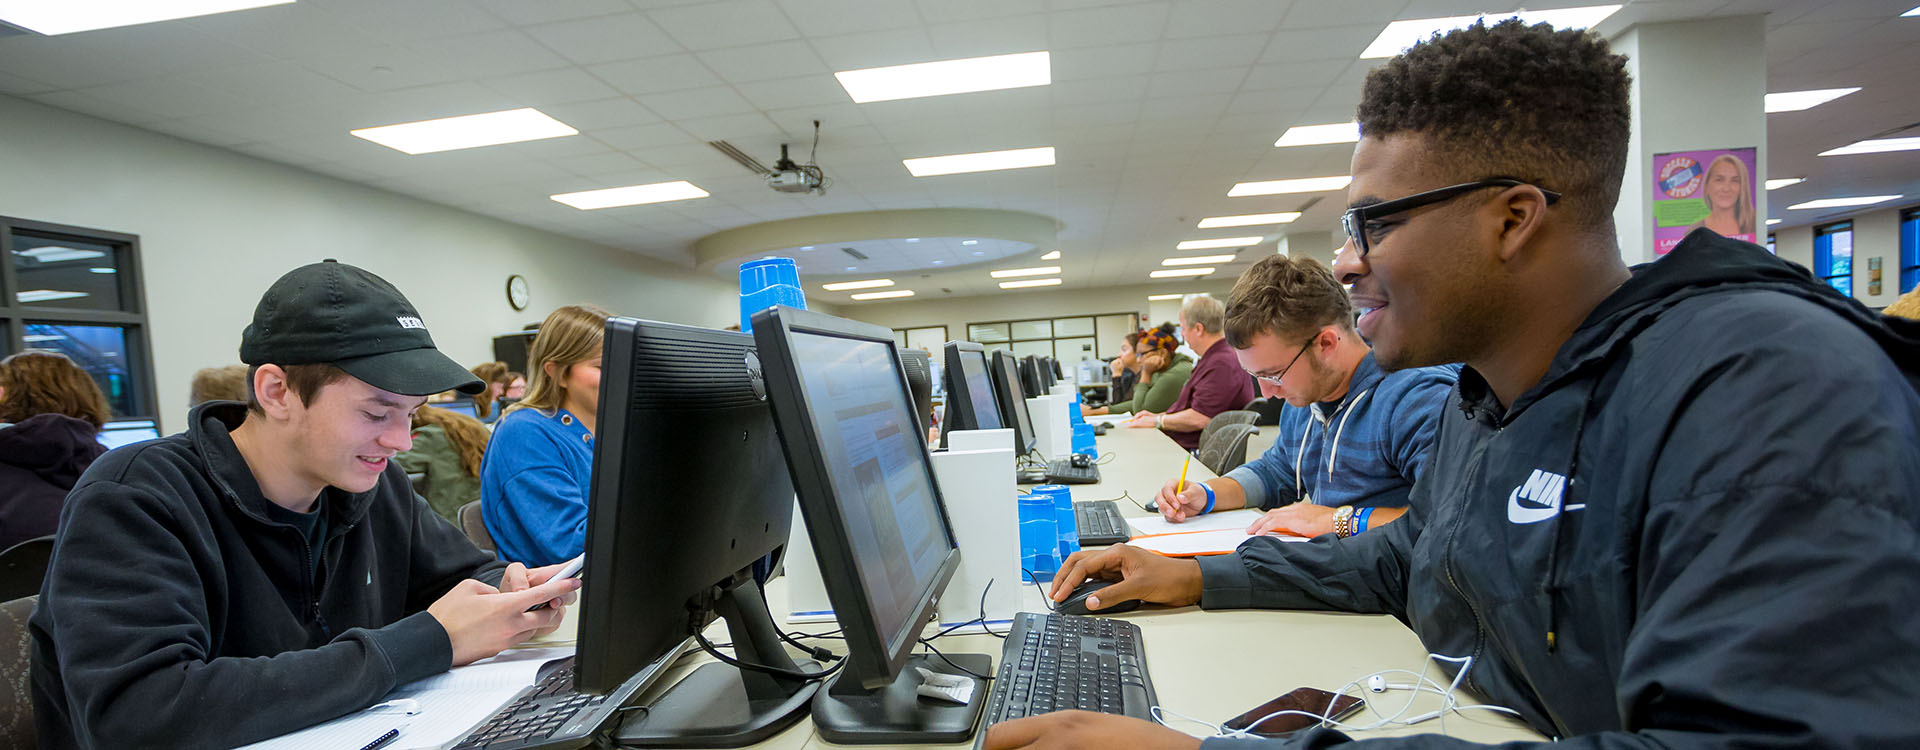 students working in the computer lab